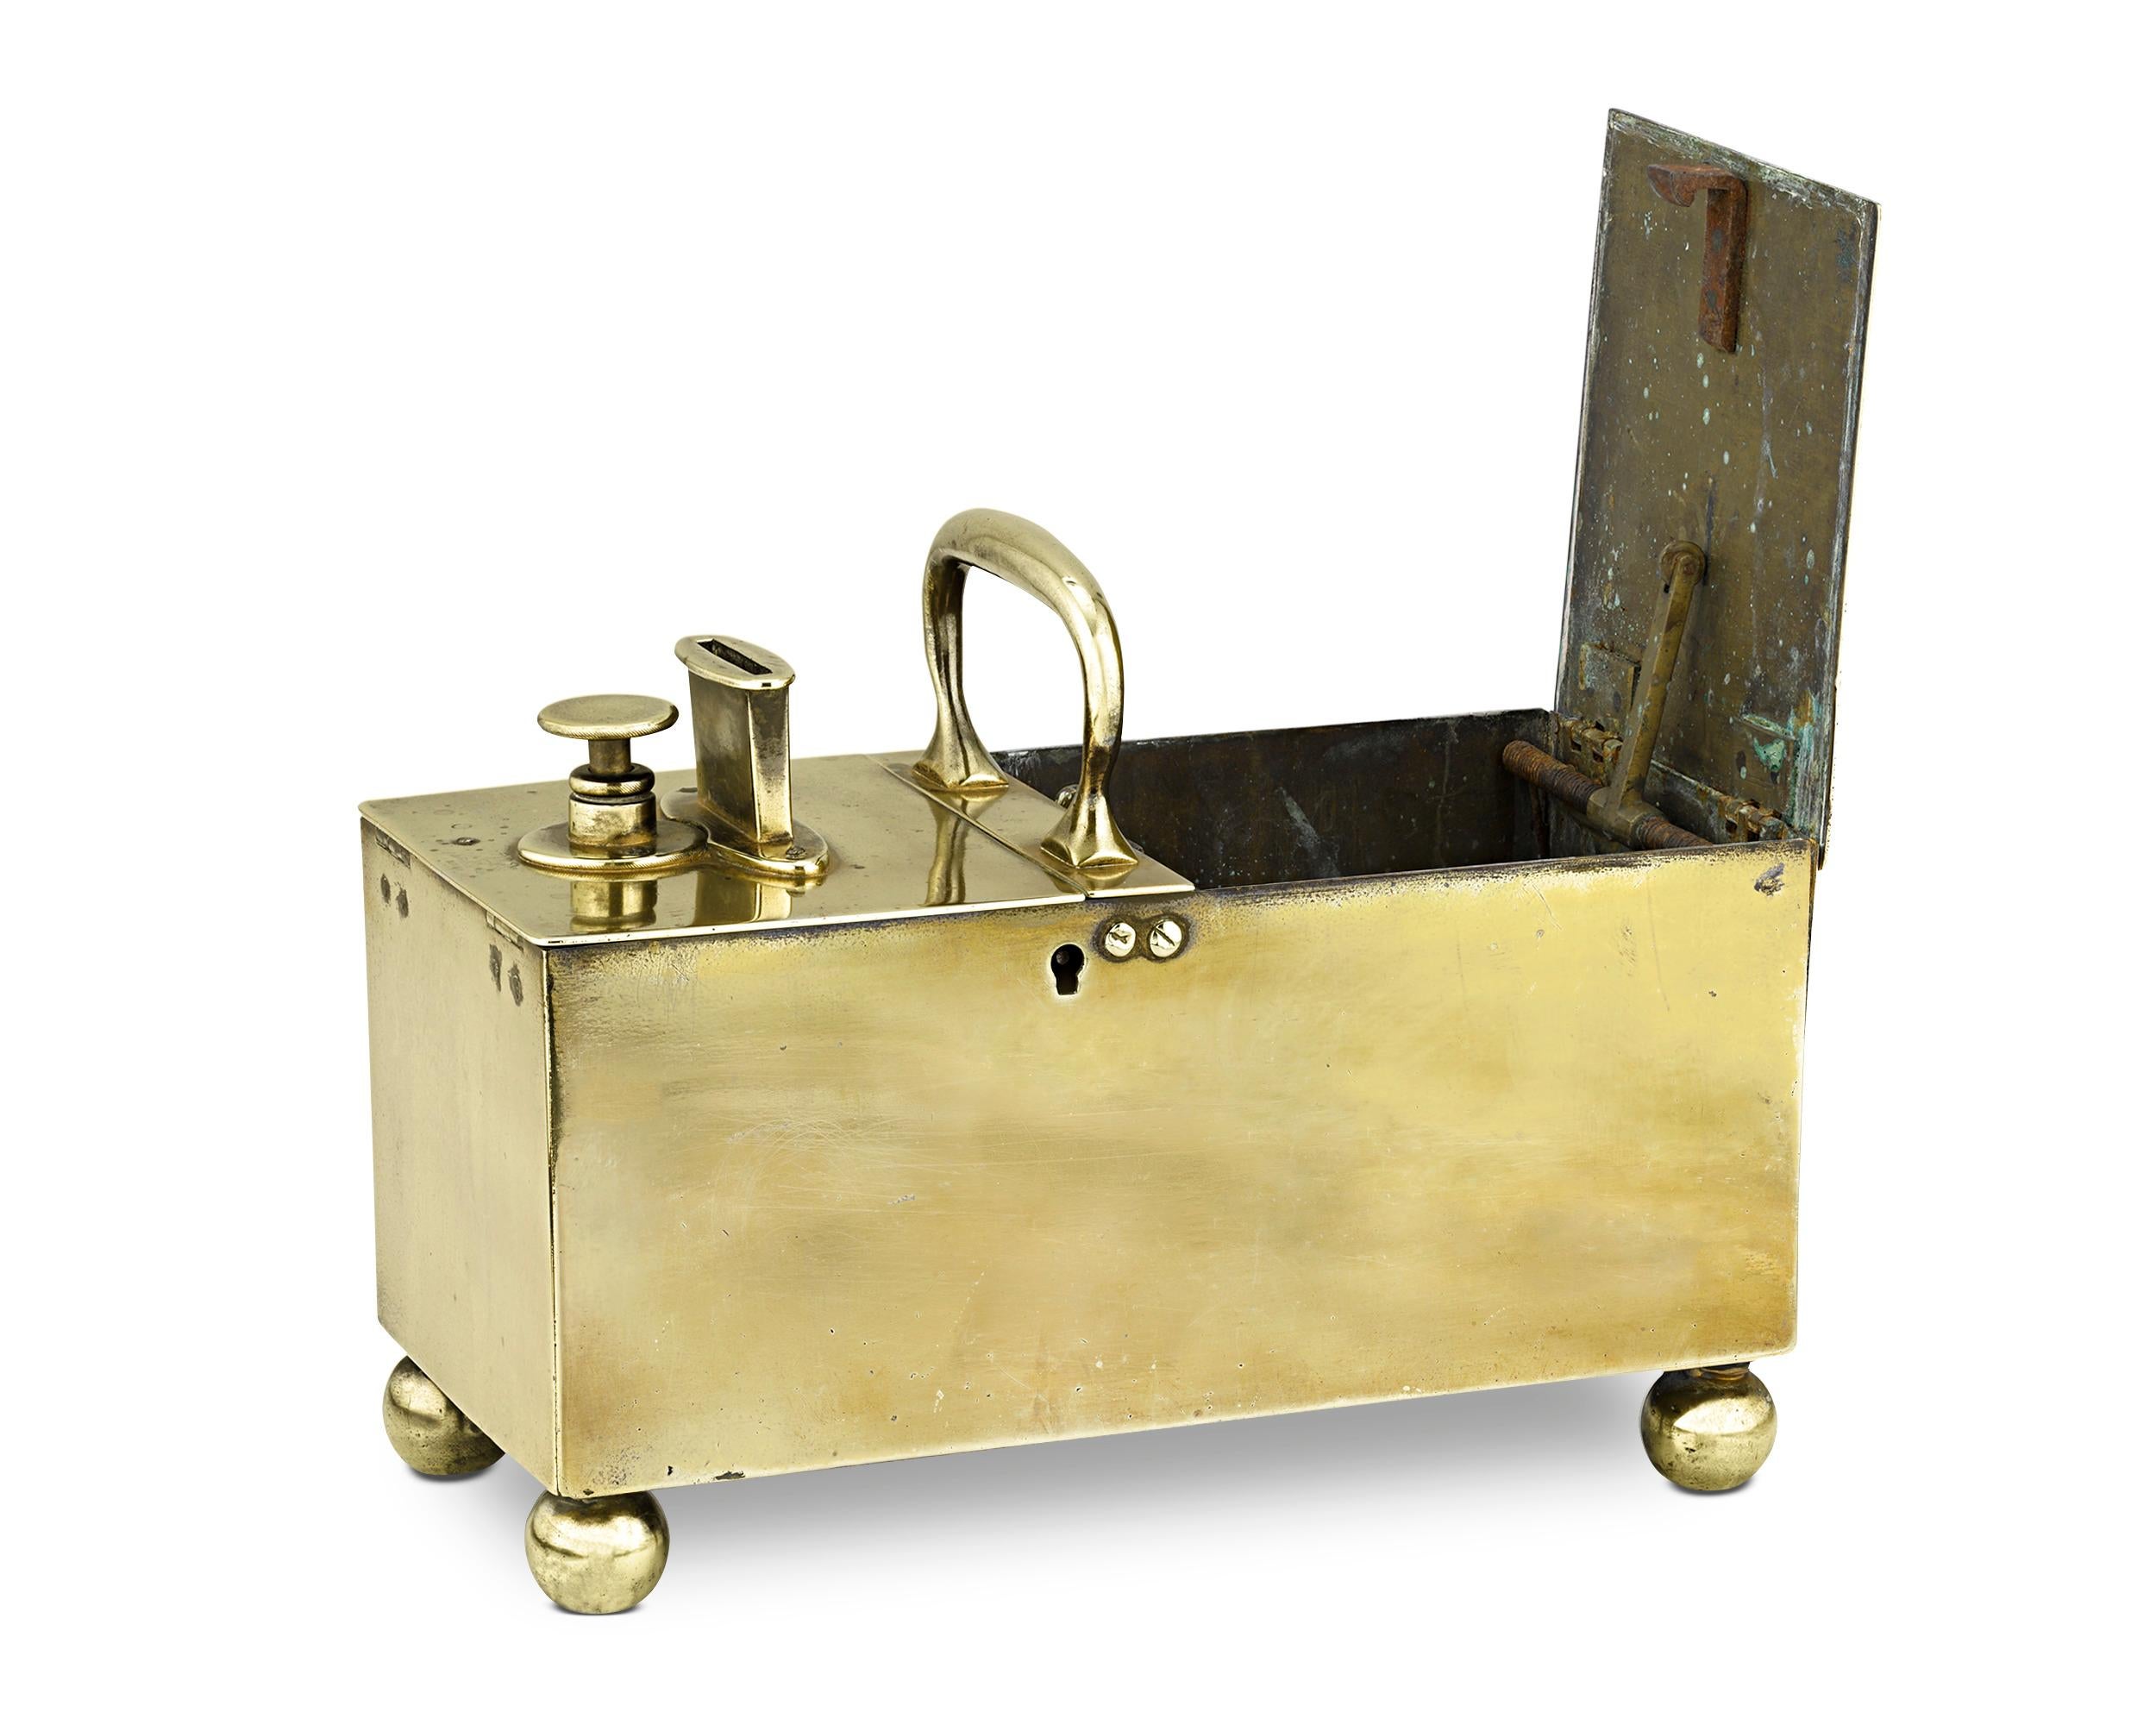 This rare brass box would have been a coveted contraption in the finest English pubs of the 18th and 19th centuries. Known as an “honesty” box, the rectangular brass box features a double-hinged lid and two compartments, one for coins and one for